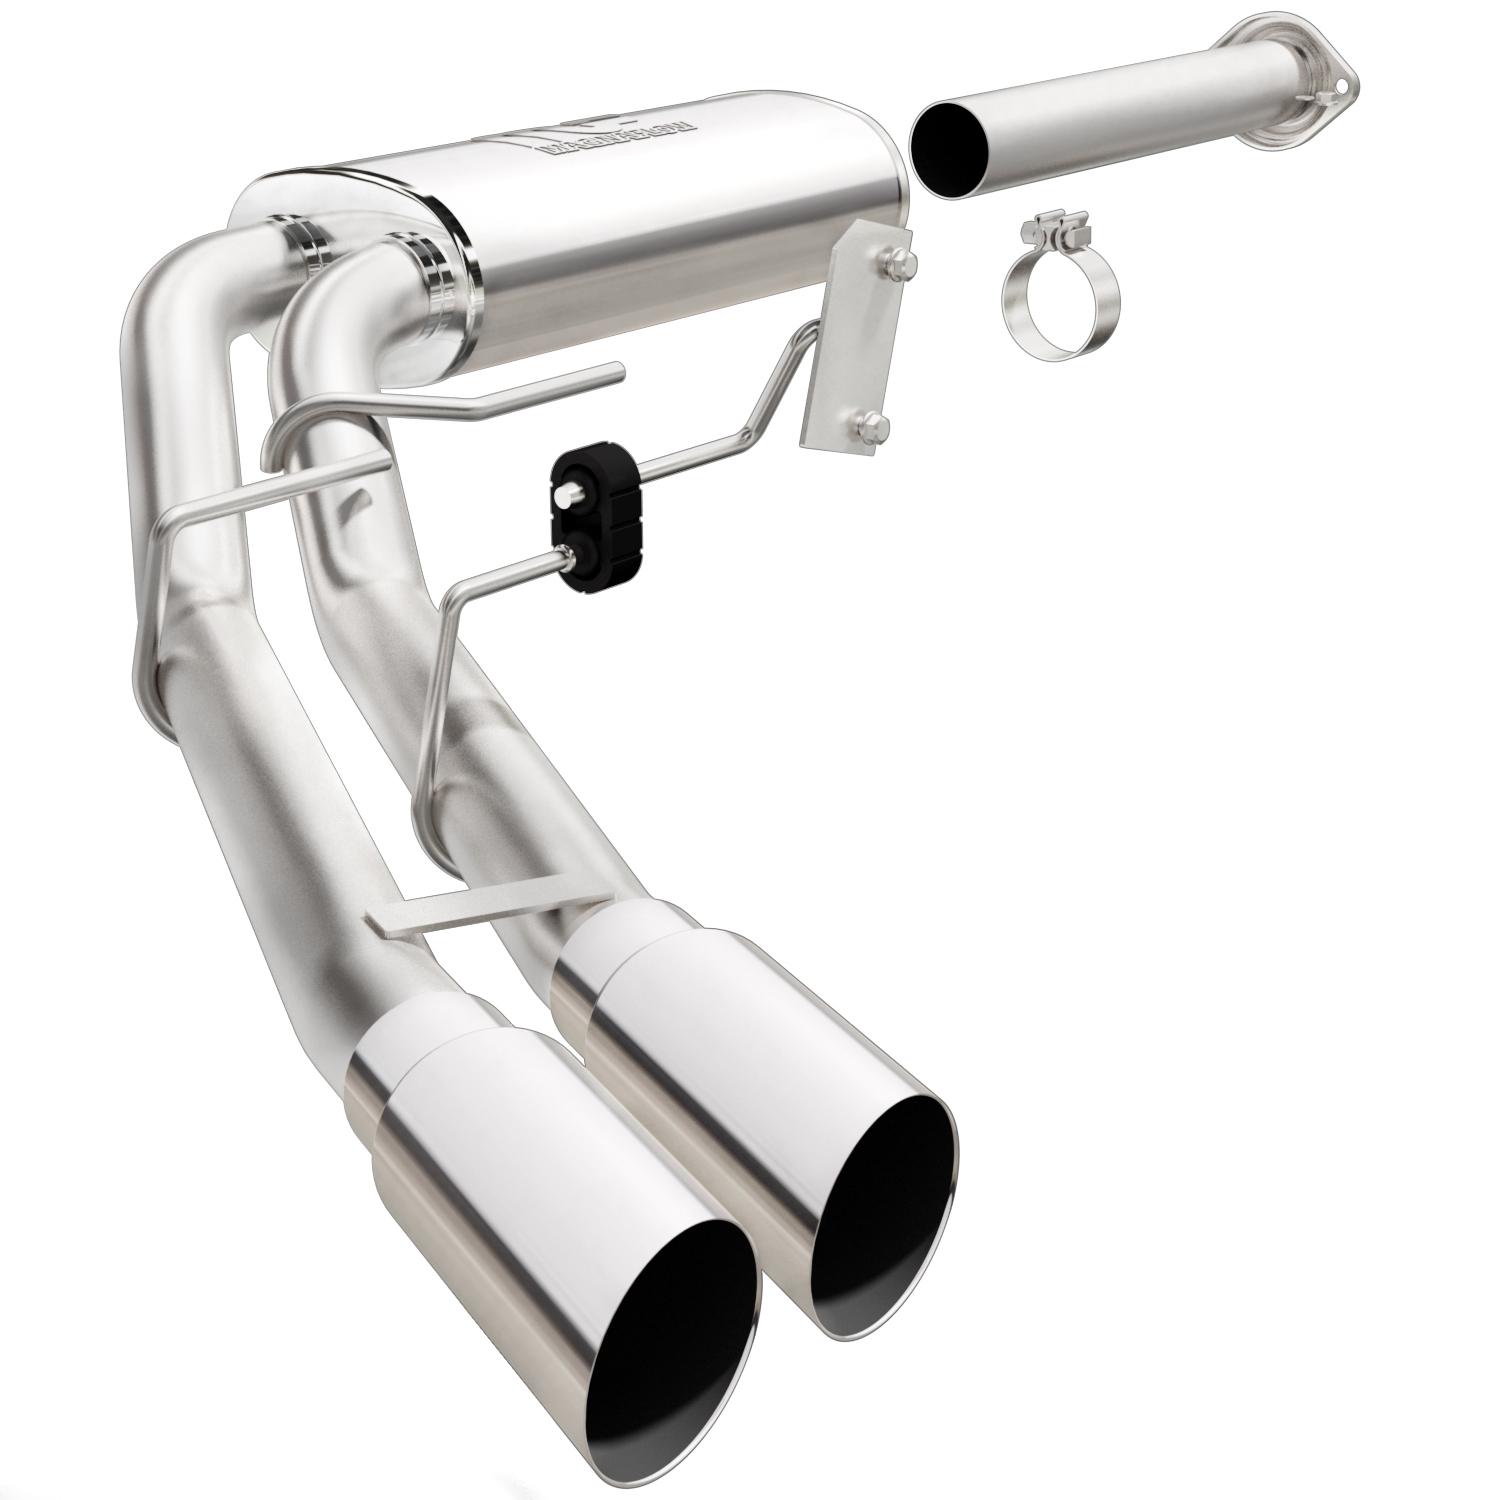 mf-series-stainless-cat-back-system